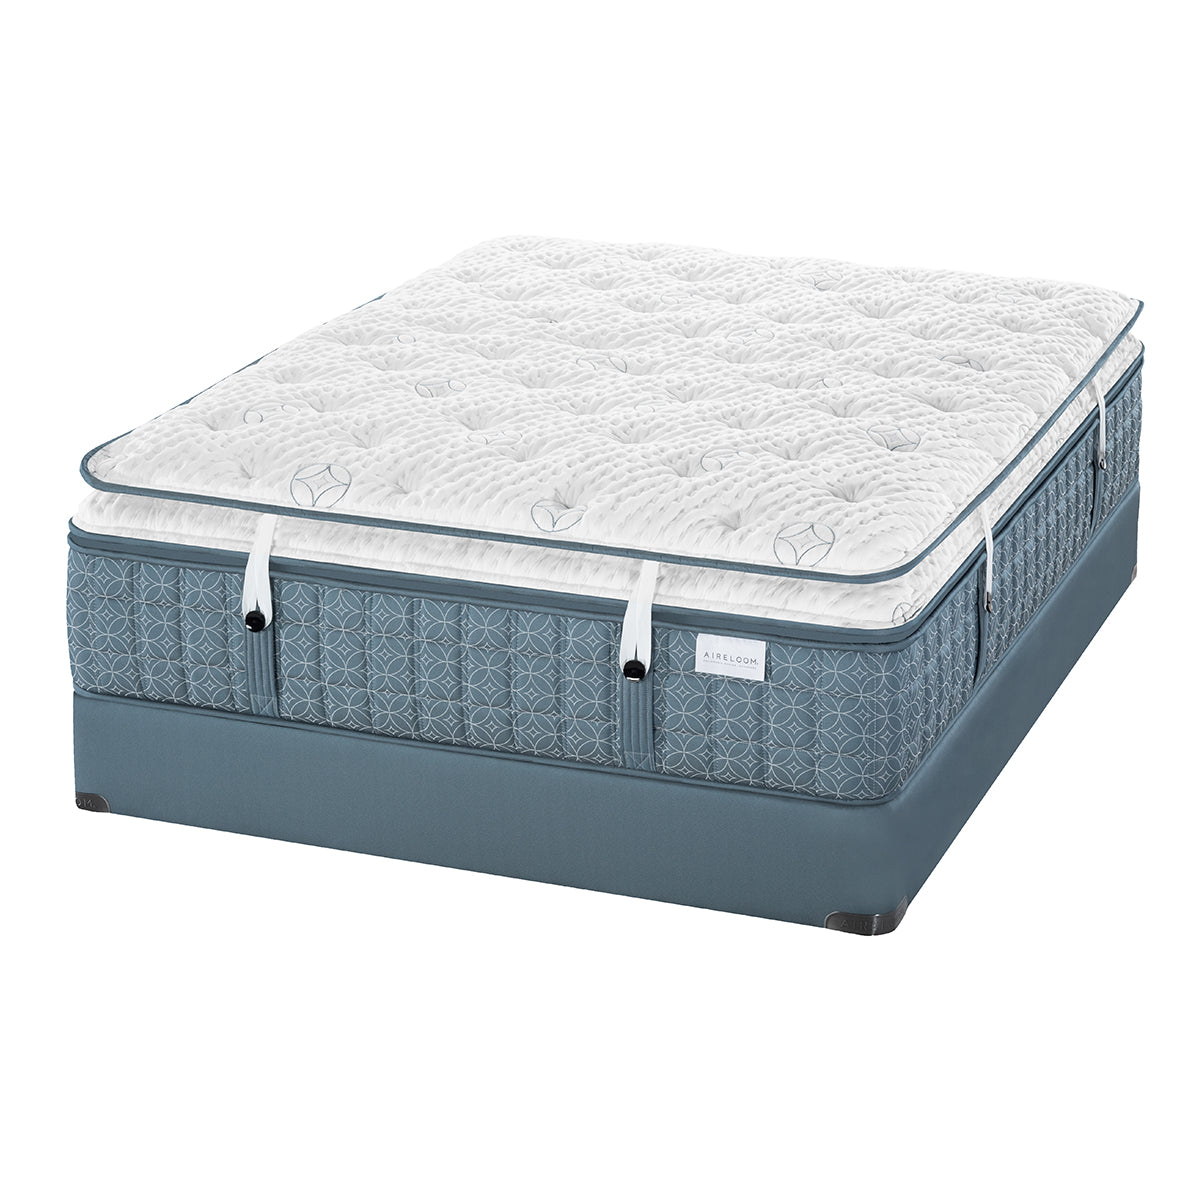 Aireloom Symphony Plush Mattress With Luxury Topper On A Box Spring